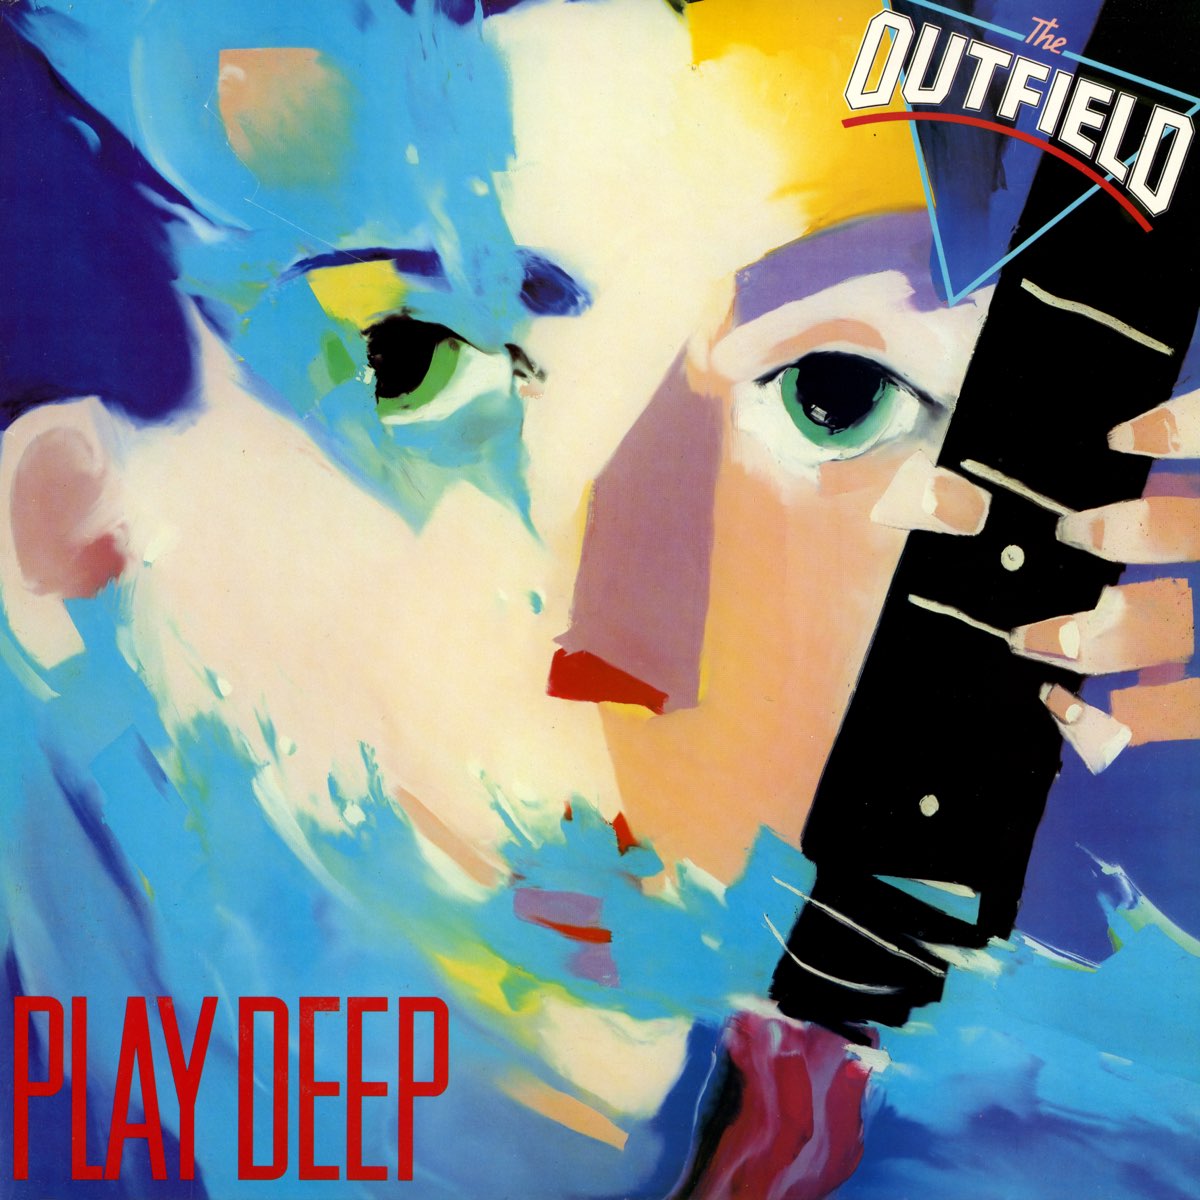 The Outfield Play Deep cover artwork